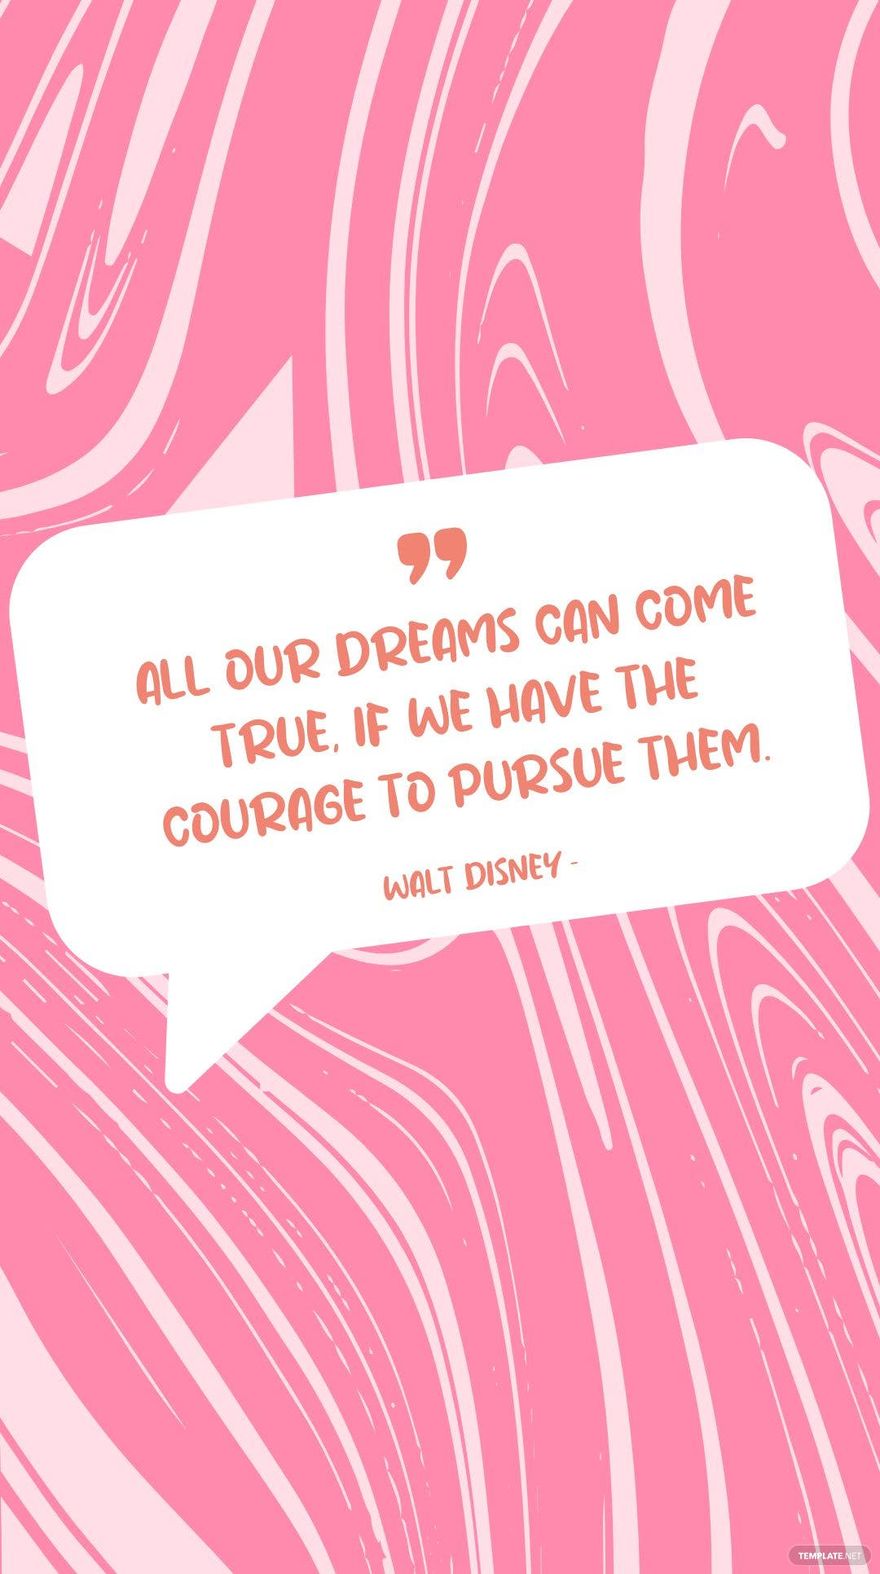 Walt Disney - All our dreams can come true, if we have the courage to pursue them.